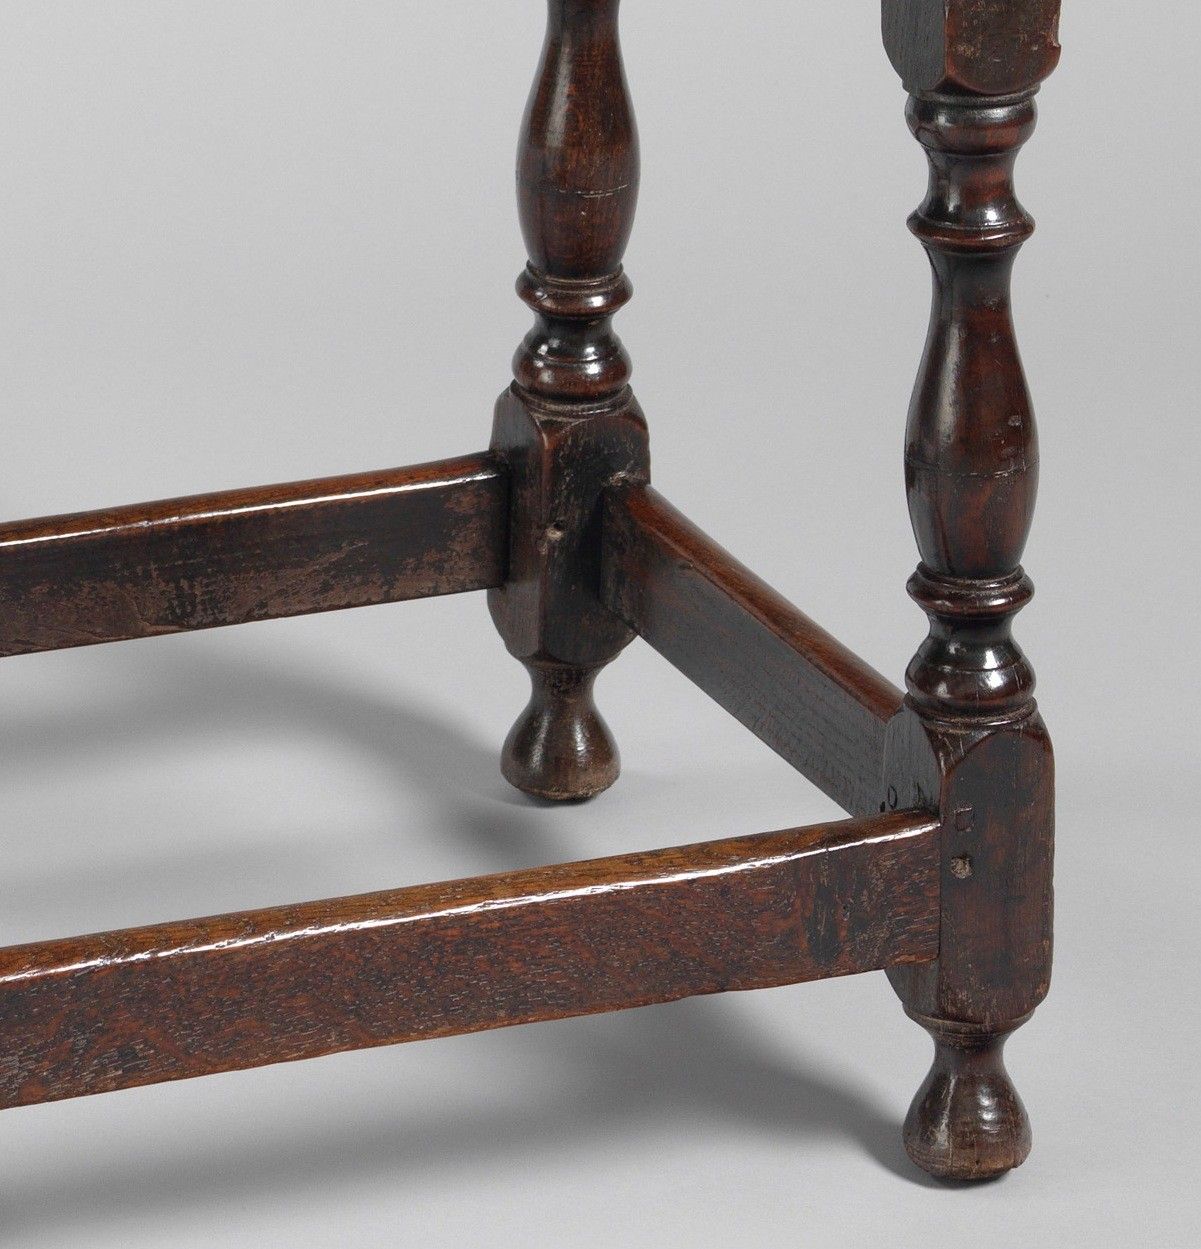 Rare Early Oval Topped Joined Baluster Leg Table